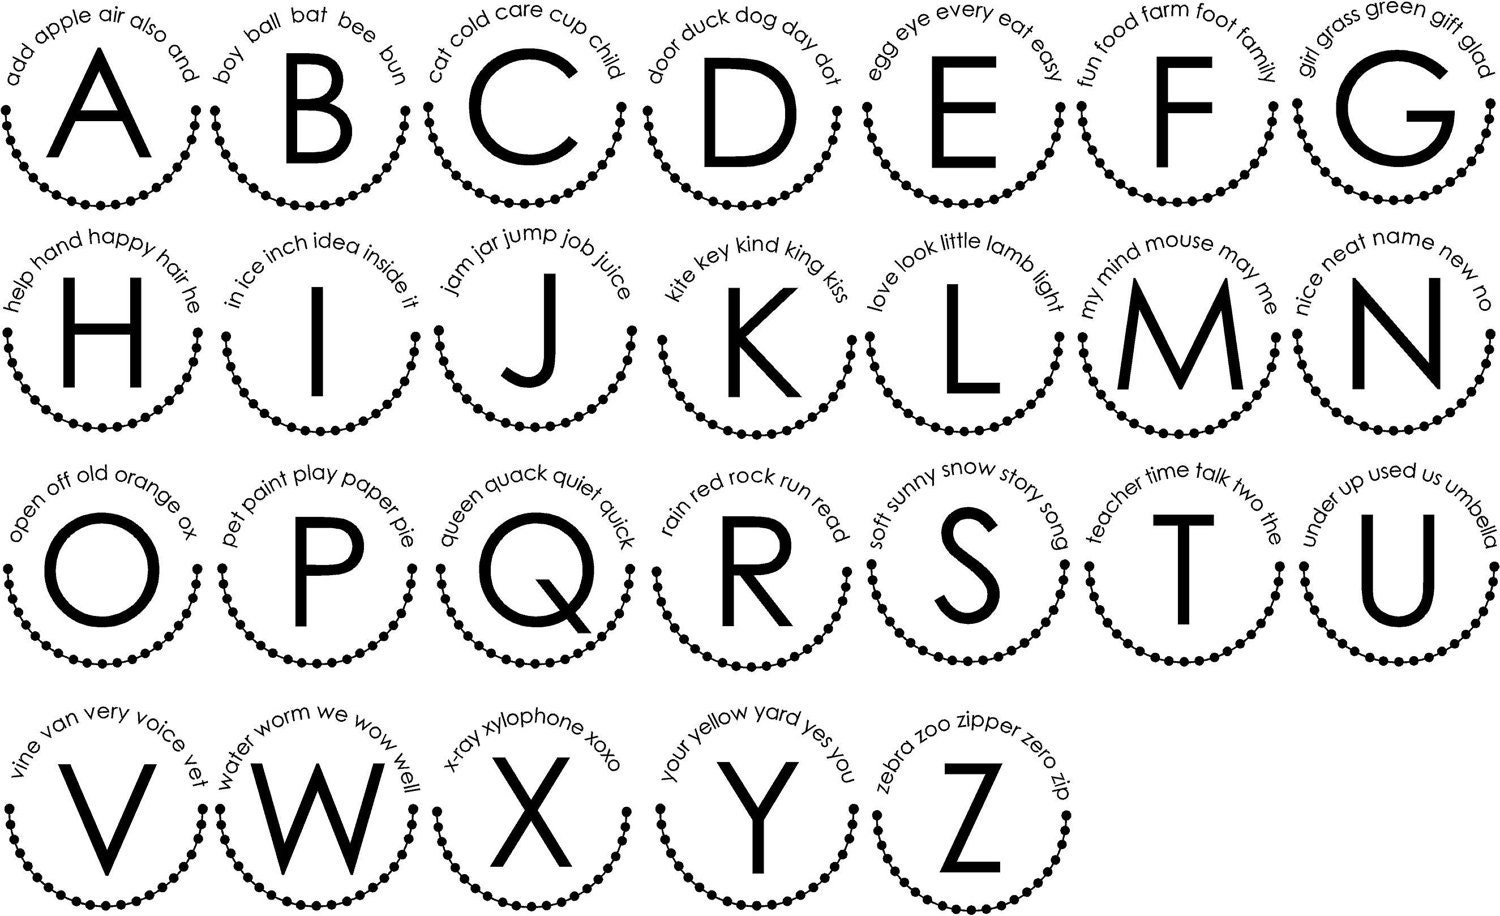 Alphabet Circles Abcteach Alphabet Letters And Numbers Bottlecap Images By Carielewyn Elsie